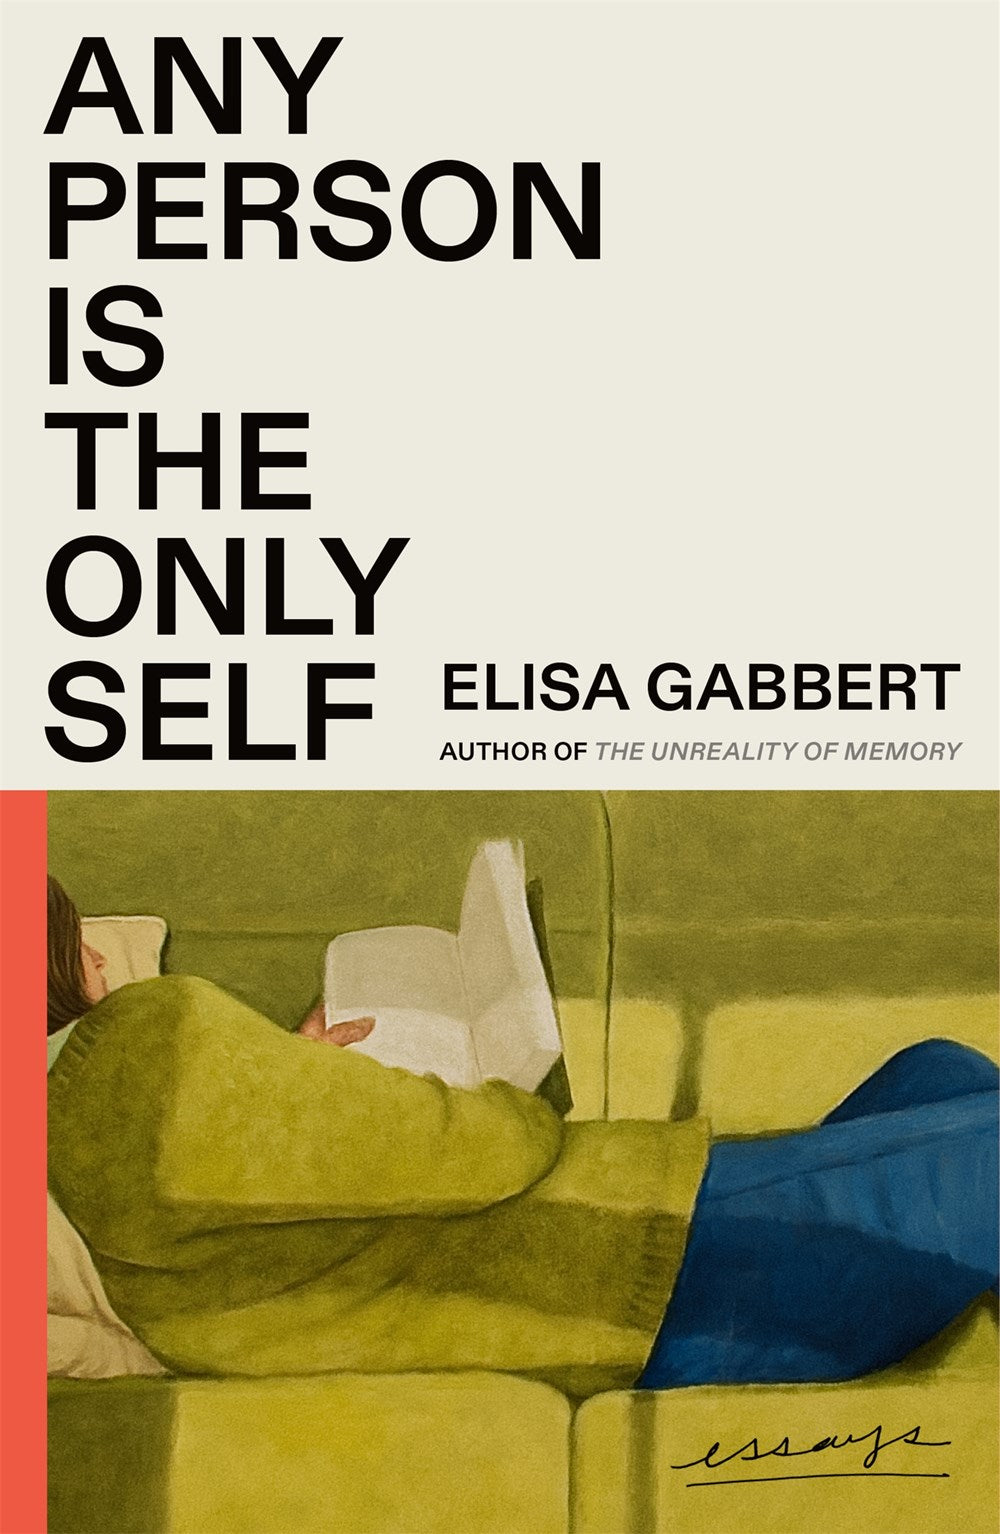 Any Person Is the Only Self: Essays by Elissa Gabbert (6/11/24)